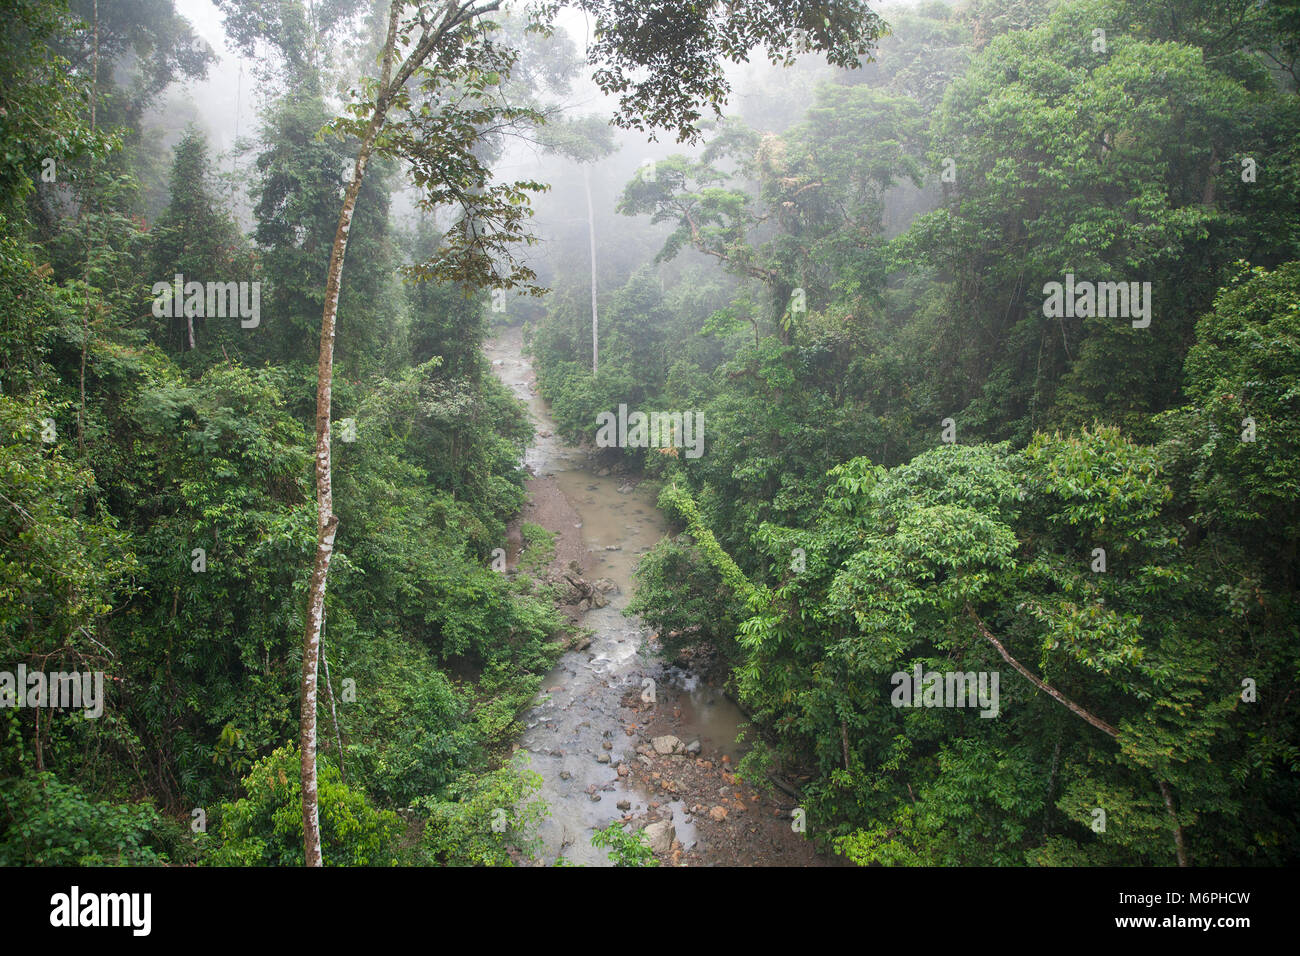 Tropical lowland dipterocarp rainforest understory along stream in Danum Valley Conservation Area, Sabah, Malaysian Borneo Stock Photo